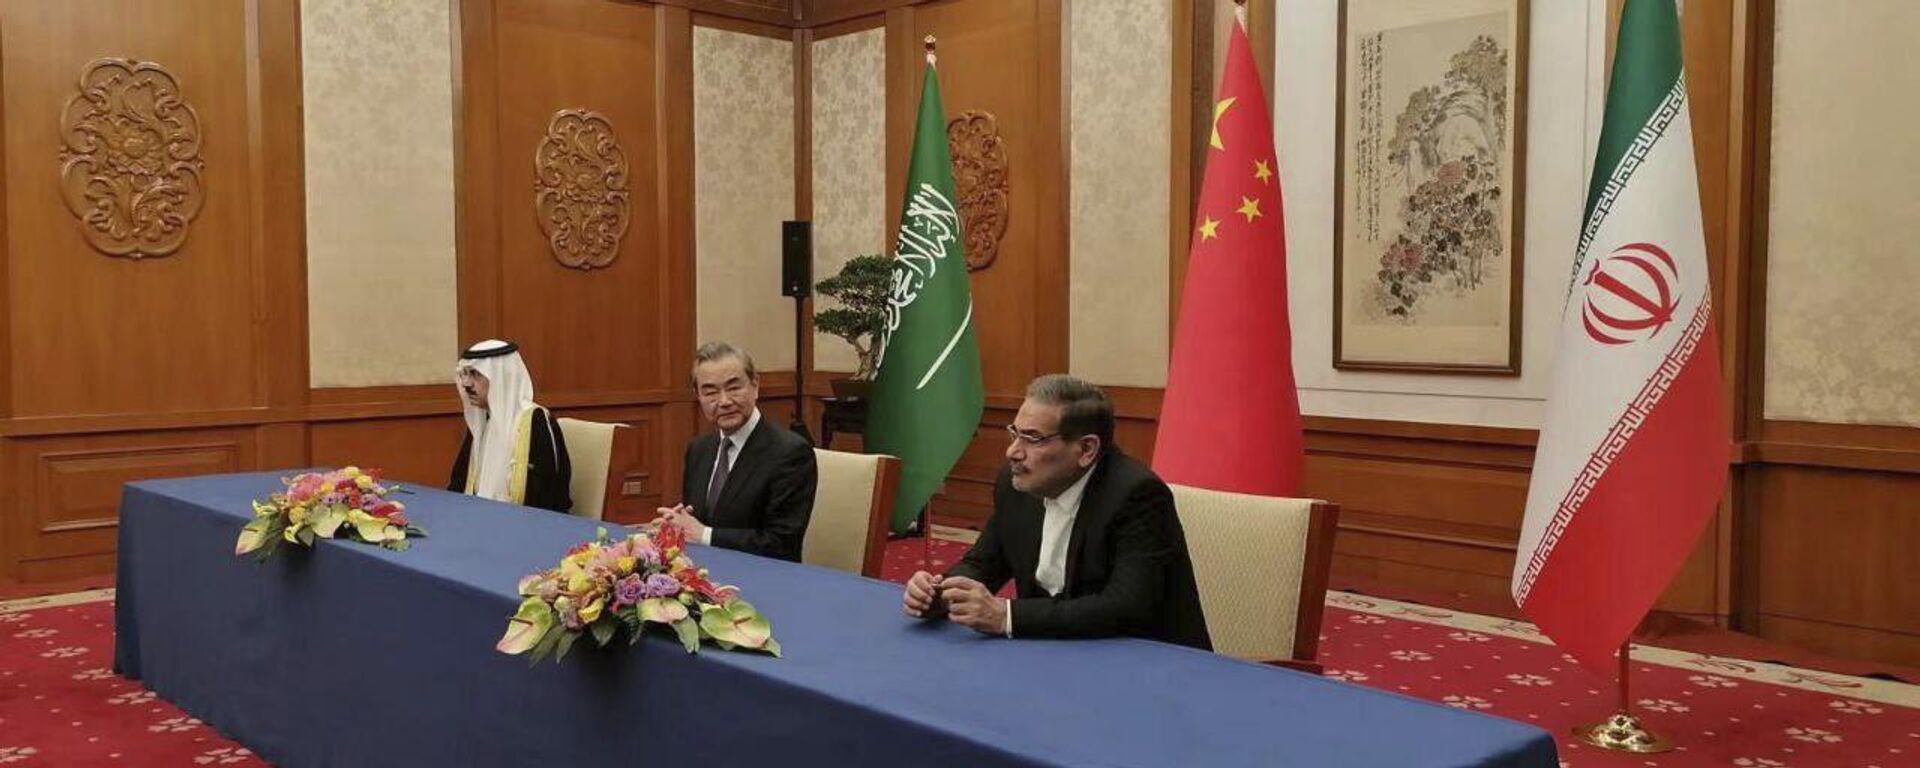 In this photo released by Nournews, Secretary of Iran's Supreme National Security Council, Ali Shamkhani, right, China's most senior diplomat Wang Yi, center, and Saudi Arabia's National Security Adviser Musaad bin Mohammed al-Aiban looks on during an agreement signing ceremony between Iran and Saudi Arabia to reestablish diplomatic relations and reopen embassies after seven years of tensions between the Mideast rivals, in Beijing, China, Friday, March 10, 2023. - Sputnik India, 1920, 18.03.2023